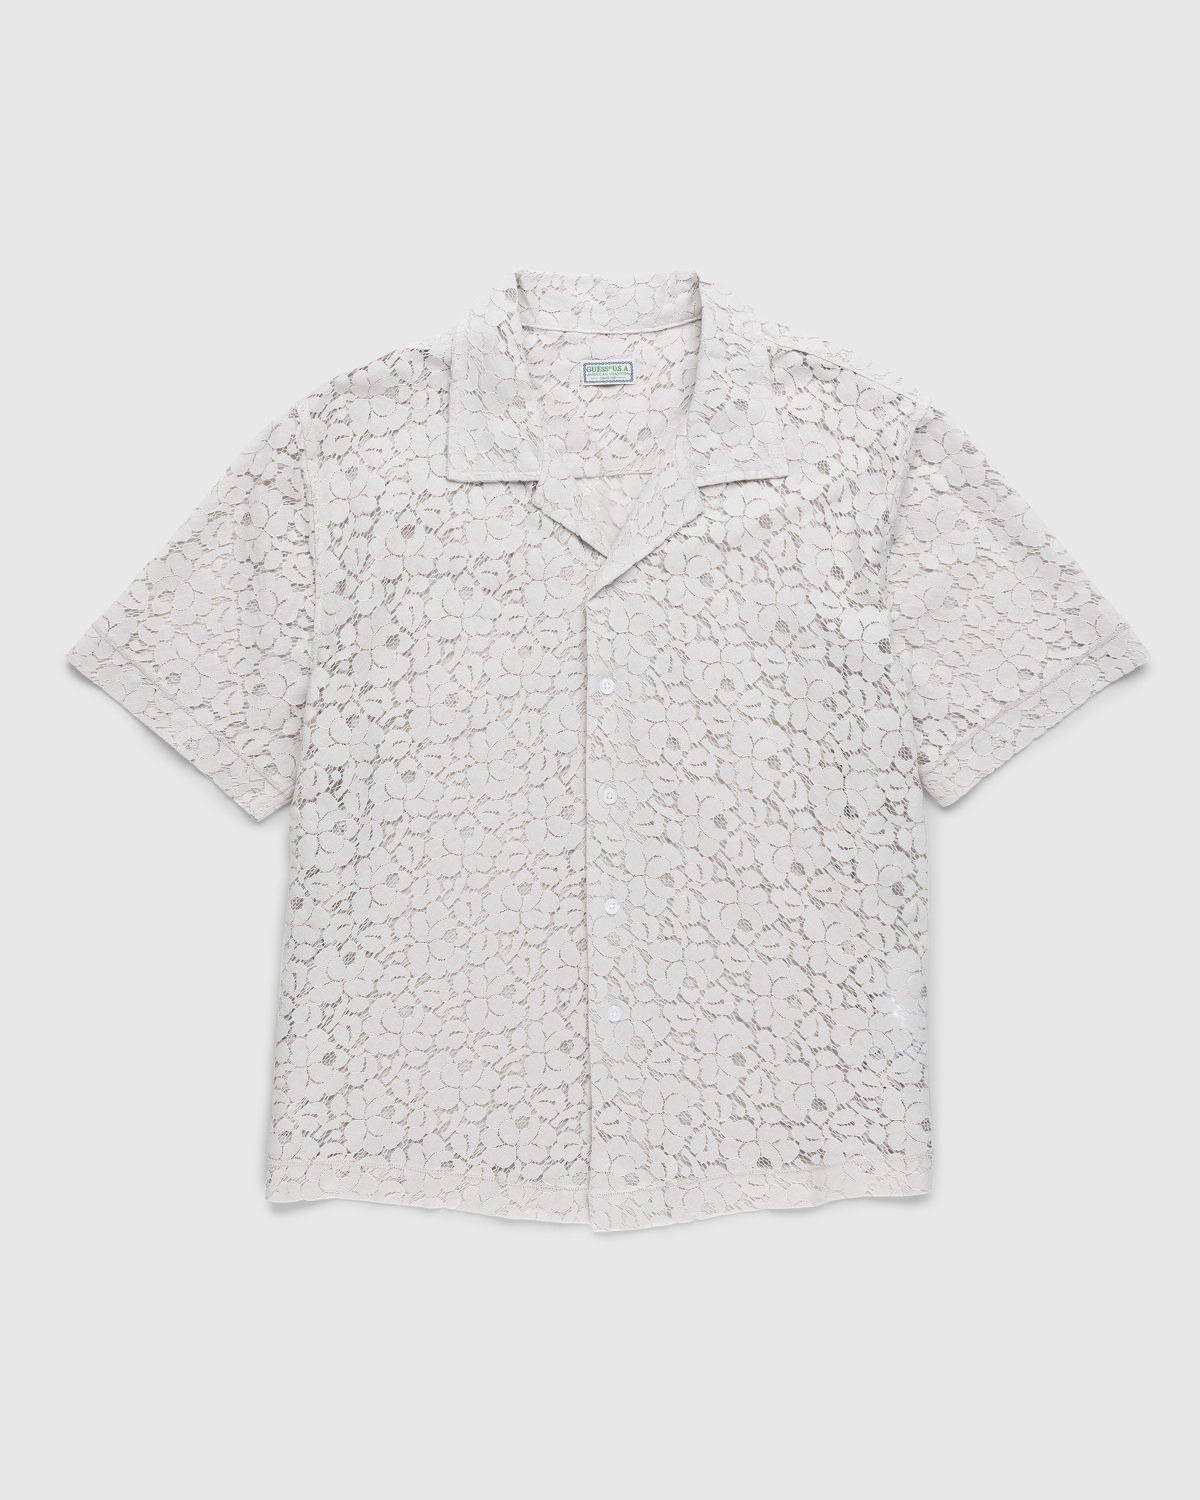 Guess USA – Lace Camp Shirt Off White | Highsnobiety Shop